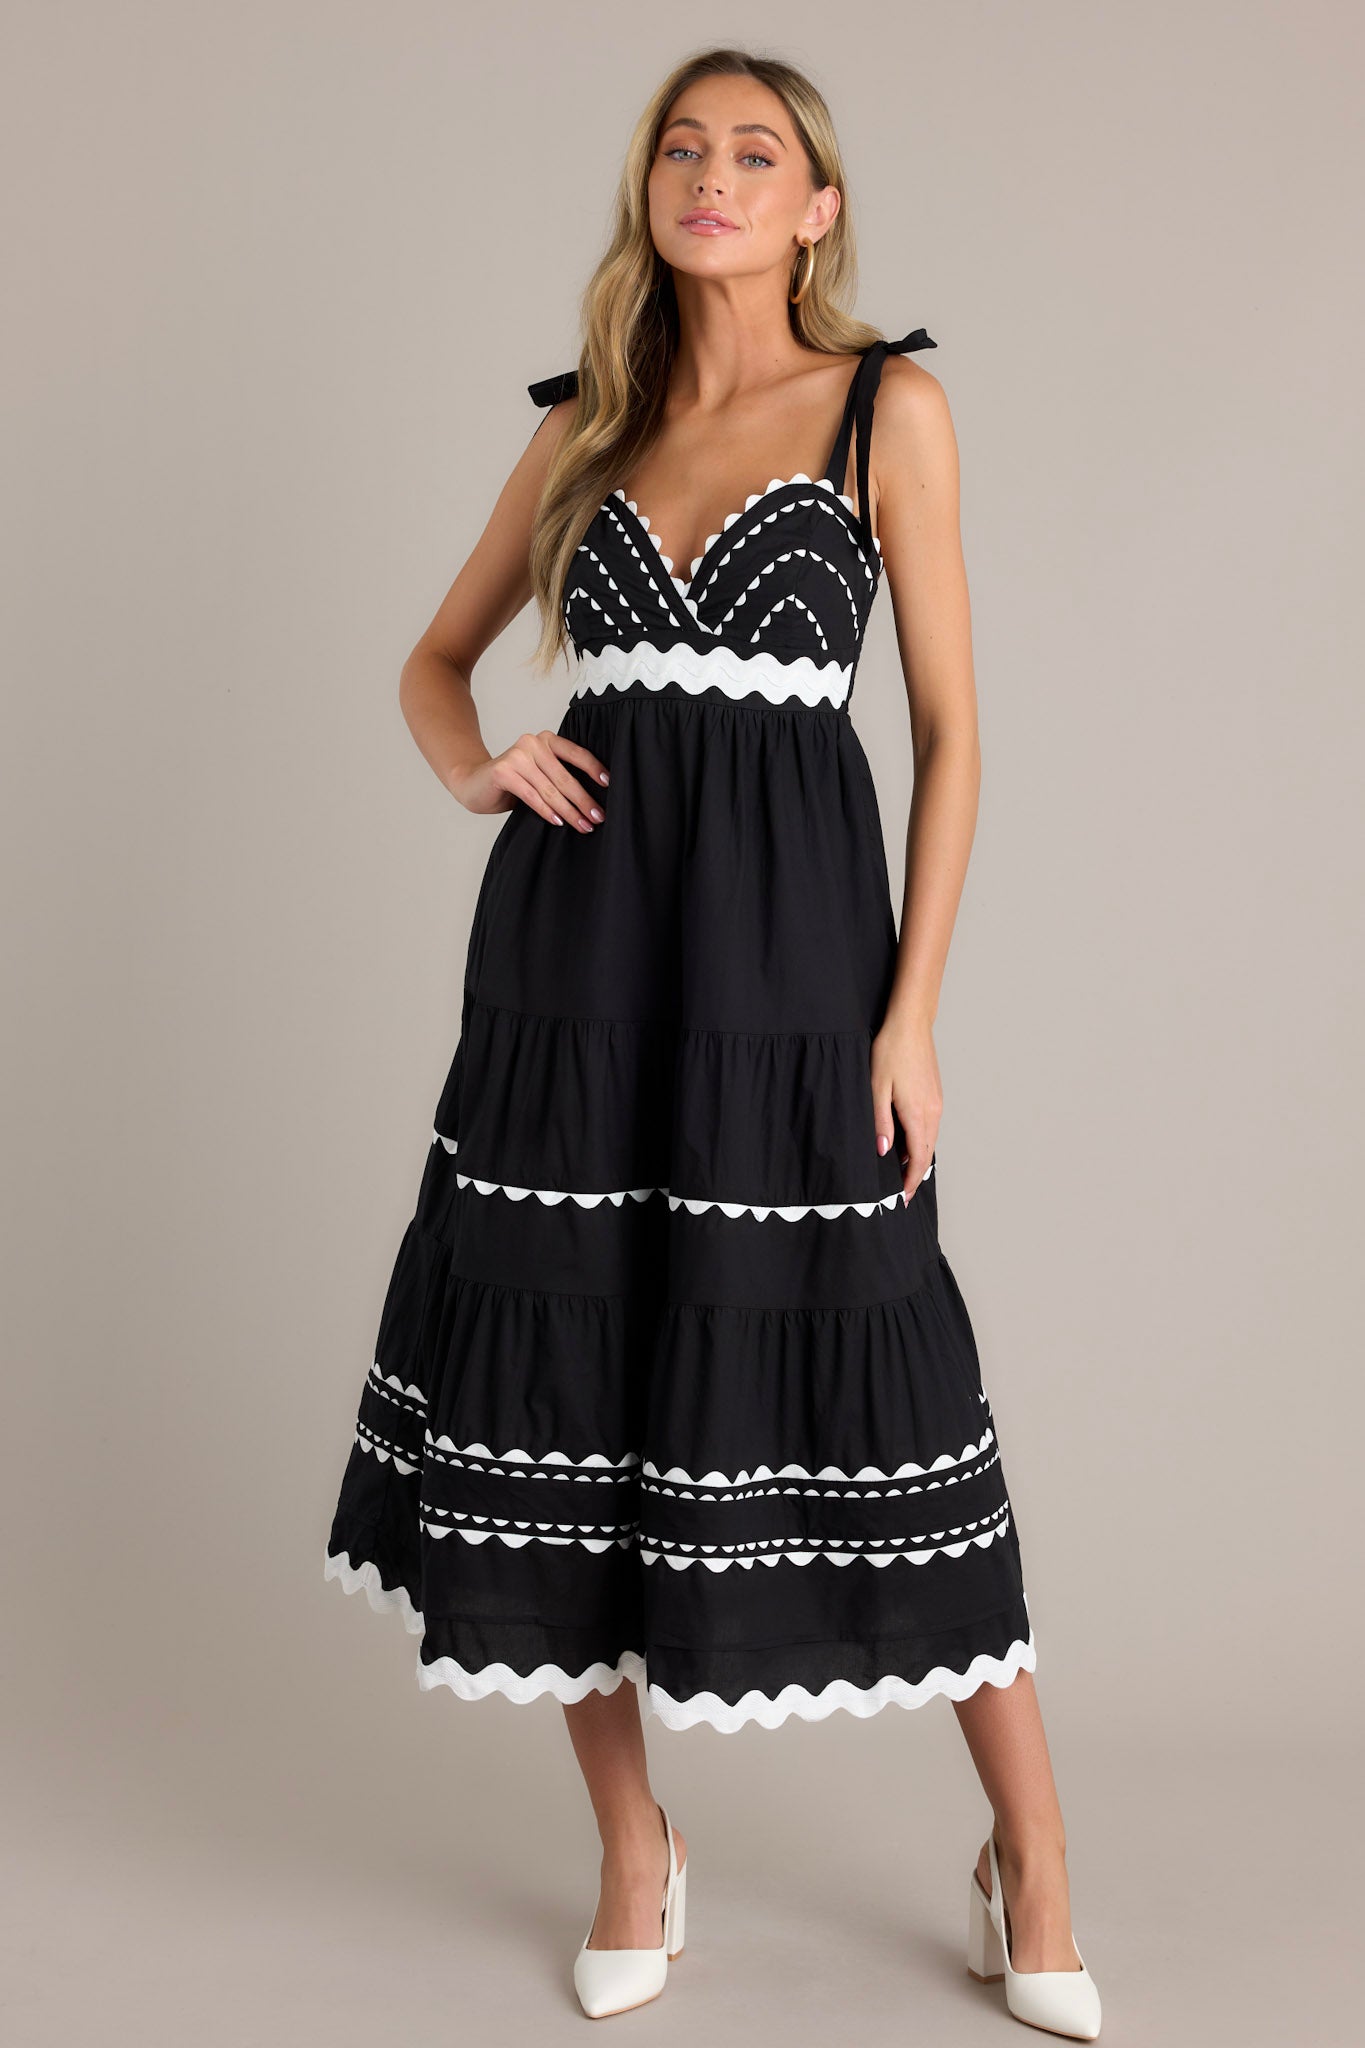 This black maxi dress features a v-neckline, thick self-tie straps, ricrac bust detailing, a fully smocked back, a ricrac waistband, tiers with ricrac detailing, and a ricrac hemline.